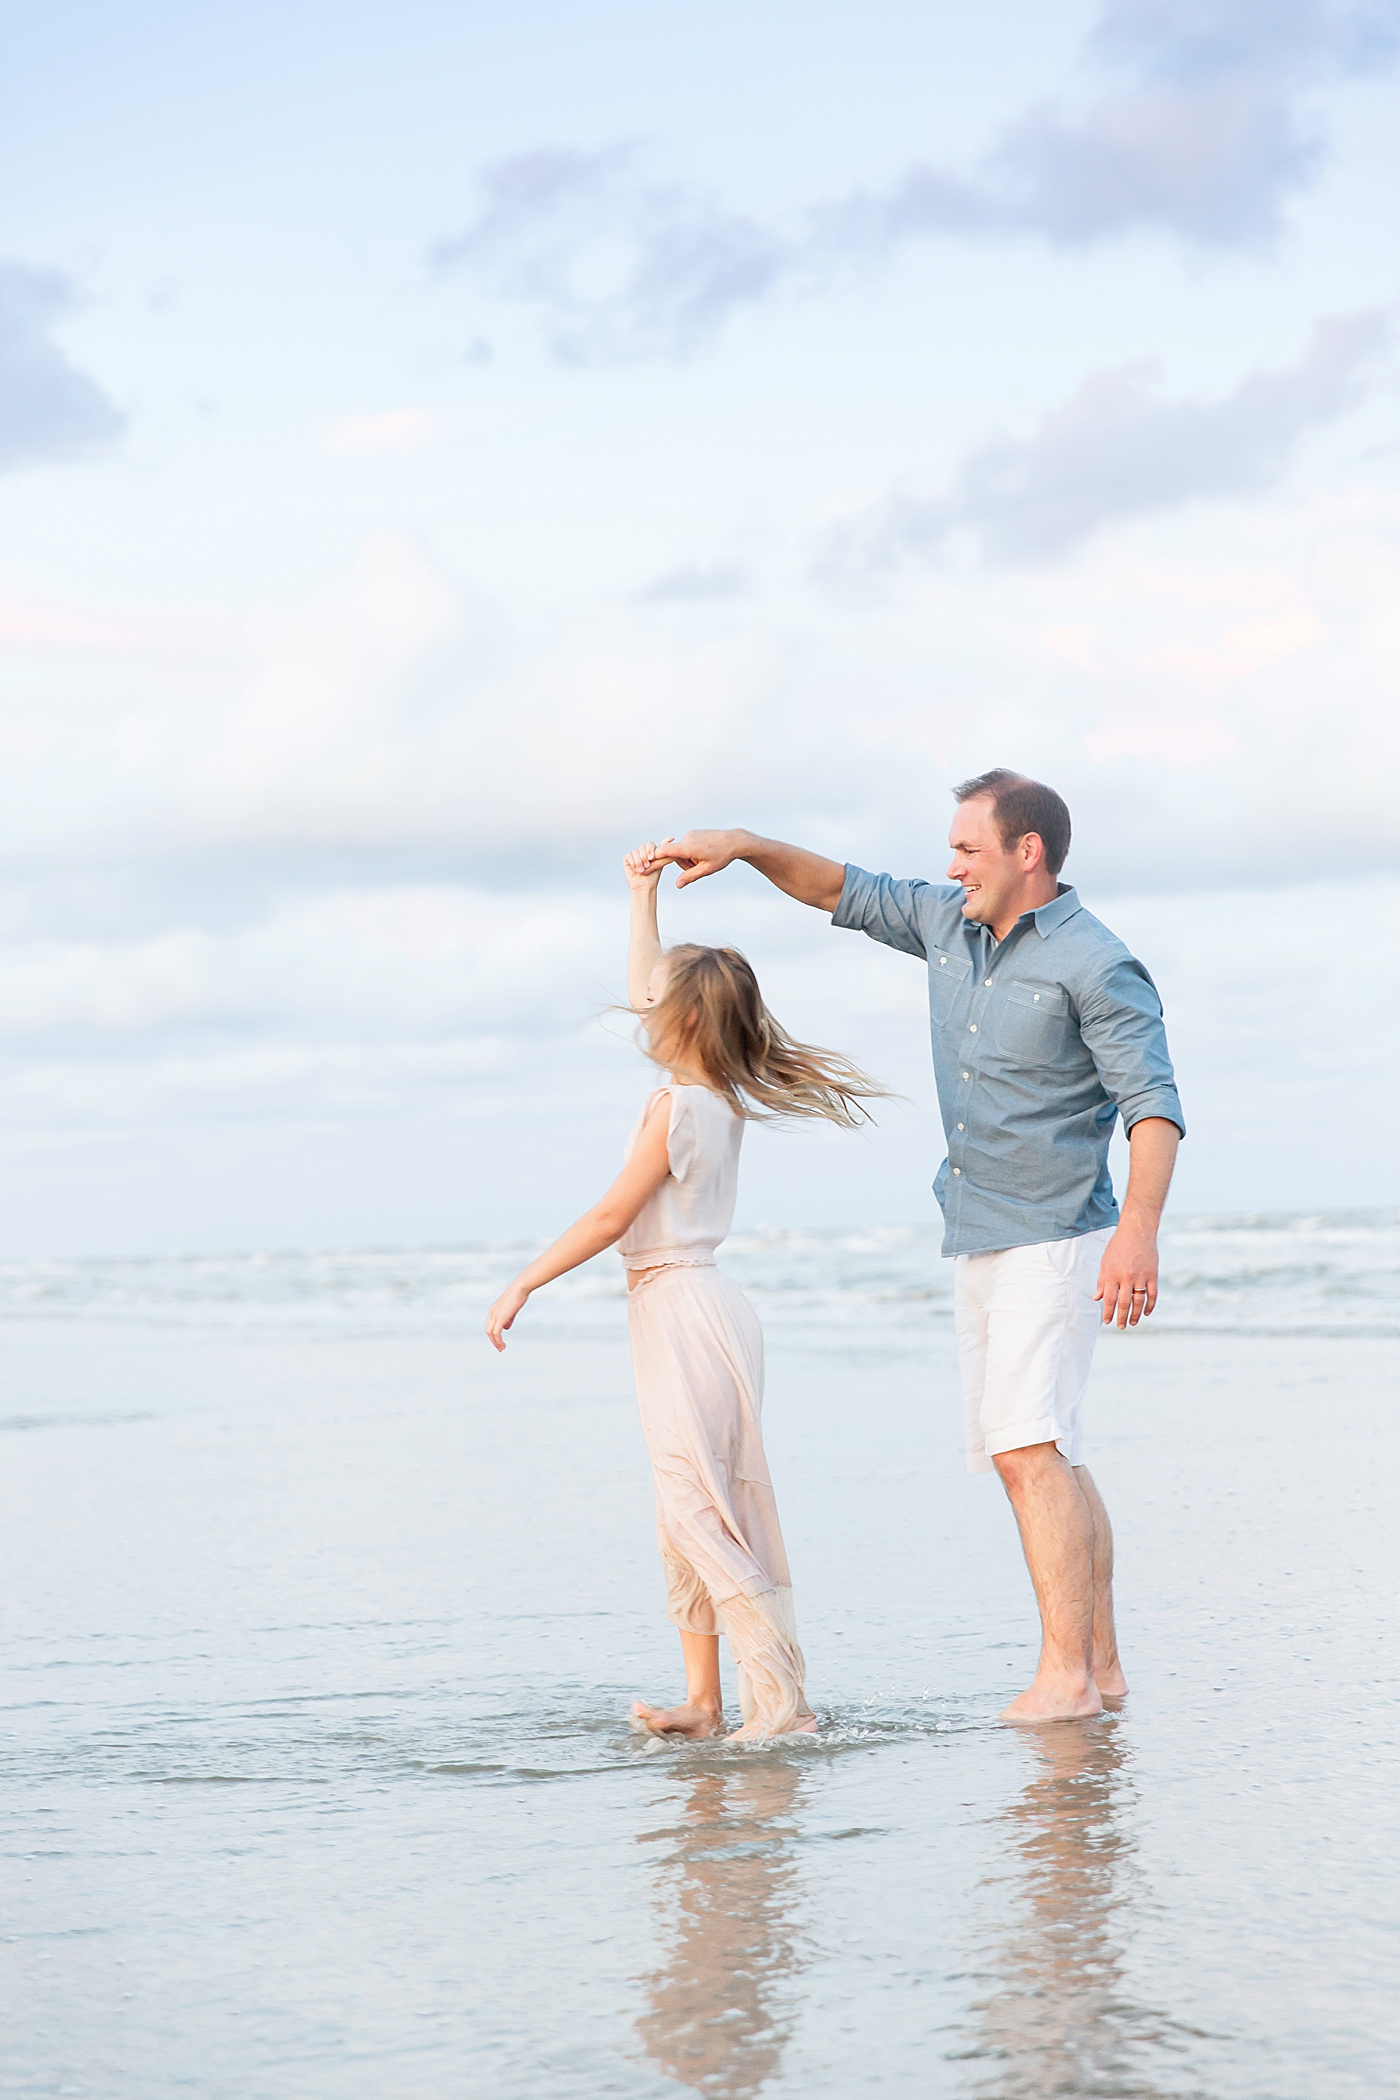 Dad dancing with his daughter on the beach. Photo by Fresh Light Photography.